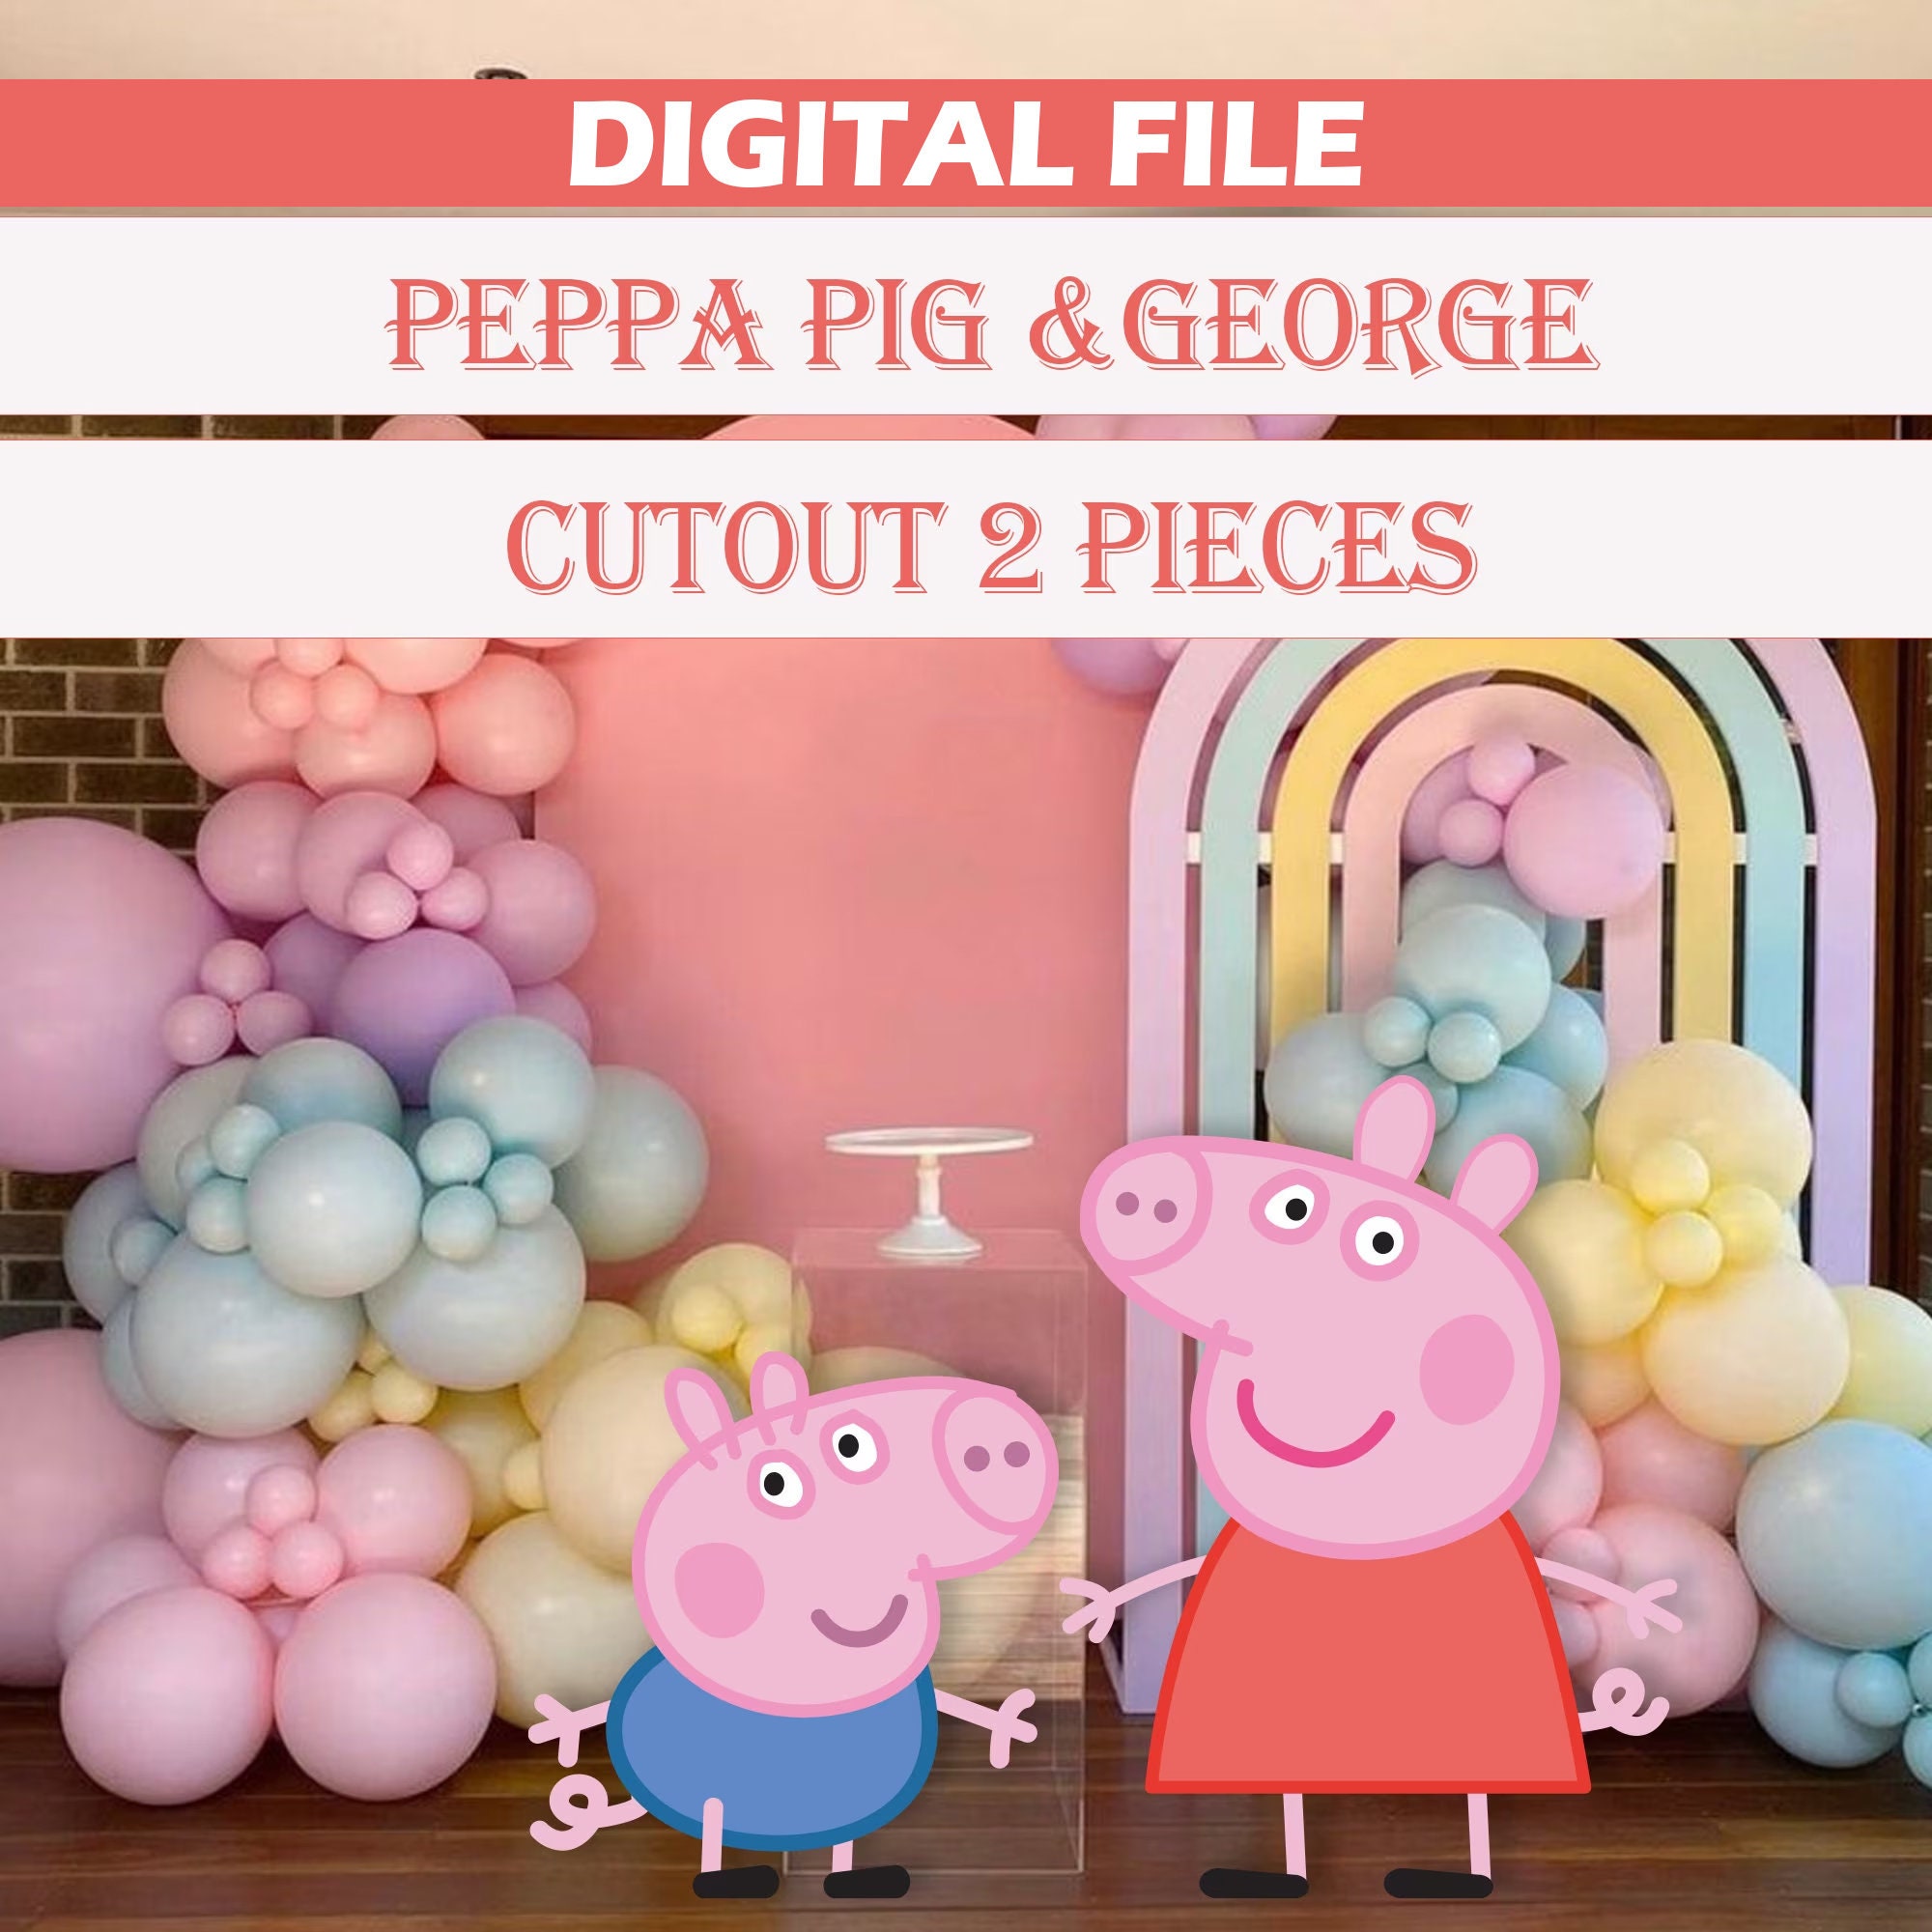 Buy CI: Figurine Peppa Pig balloons for only 3.62 USD by Anagram